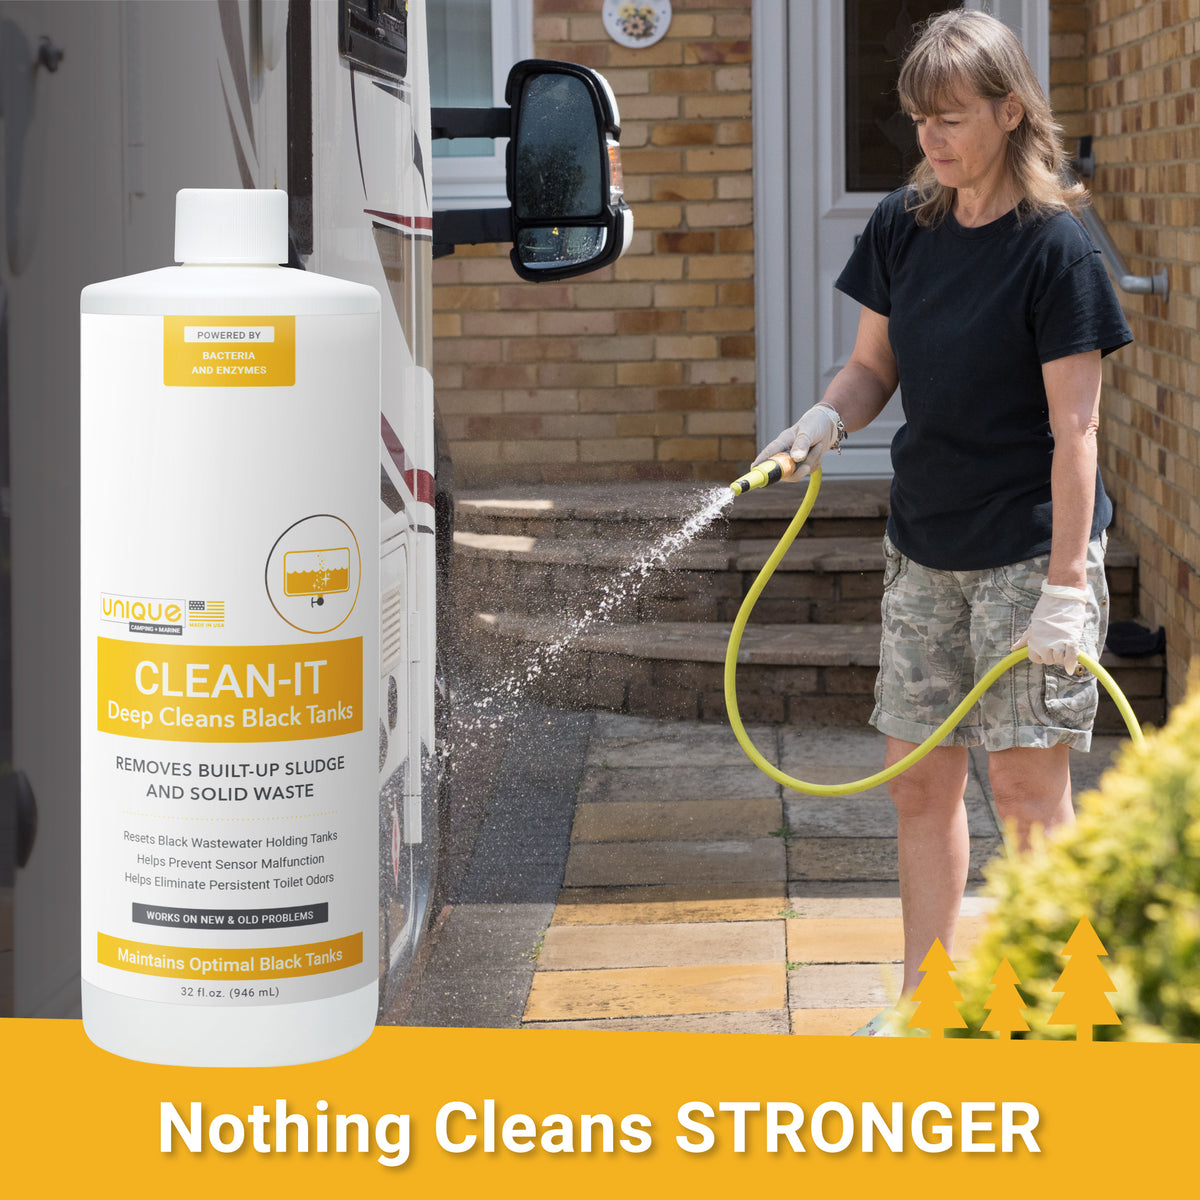 Nothing cleans holding tanks stronger than Clean-It black tank deep cleaner.